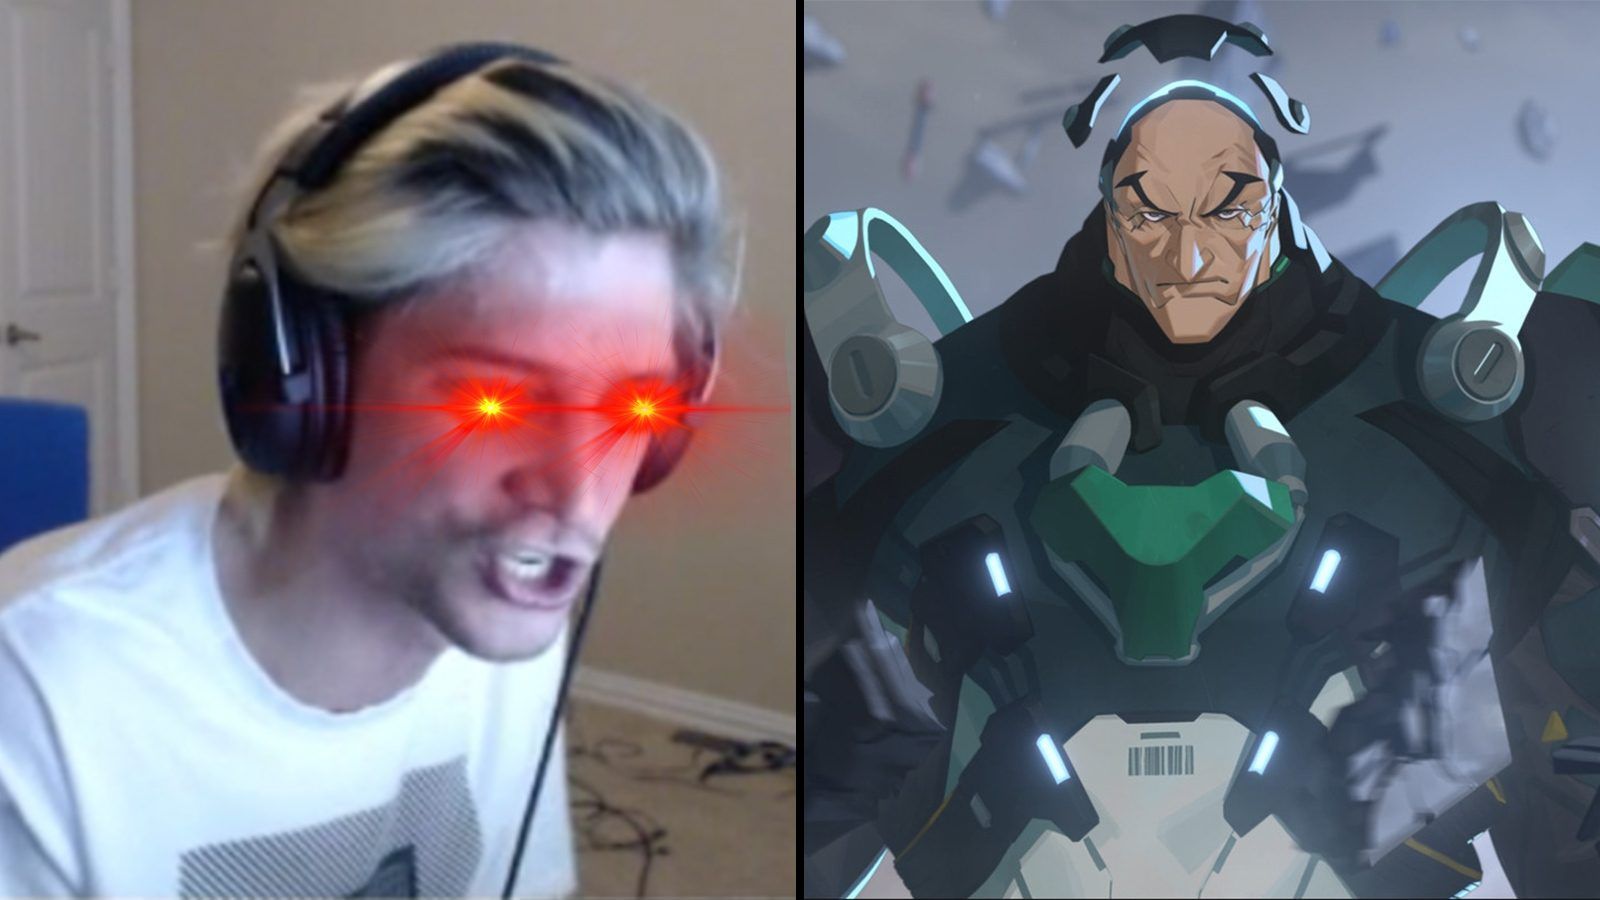 xQc disappointed Overwatch didn't include him in Sigma's release